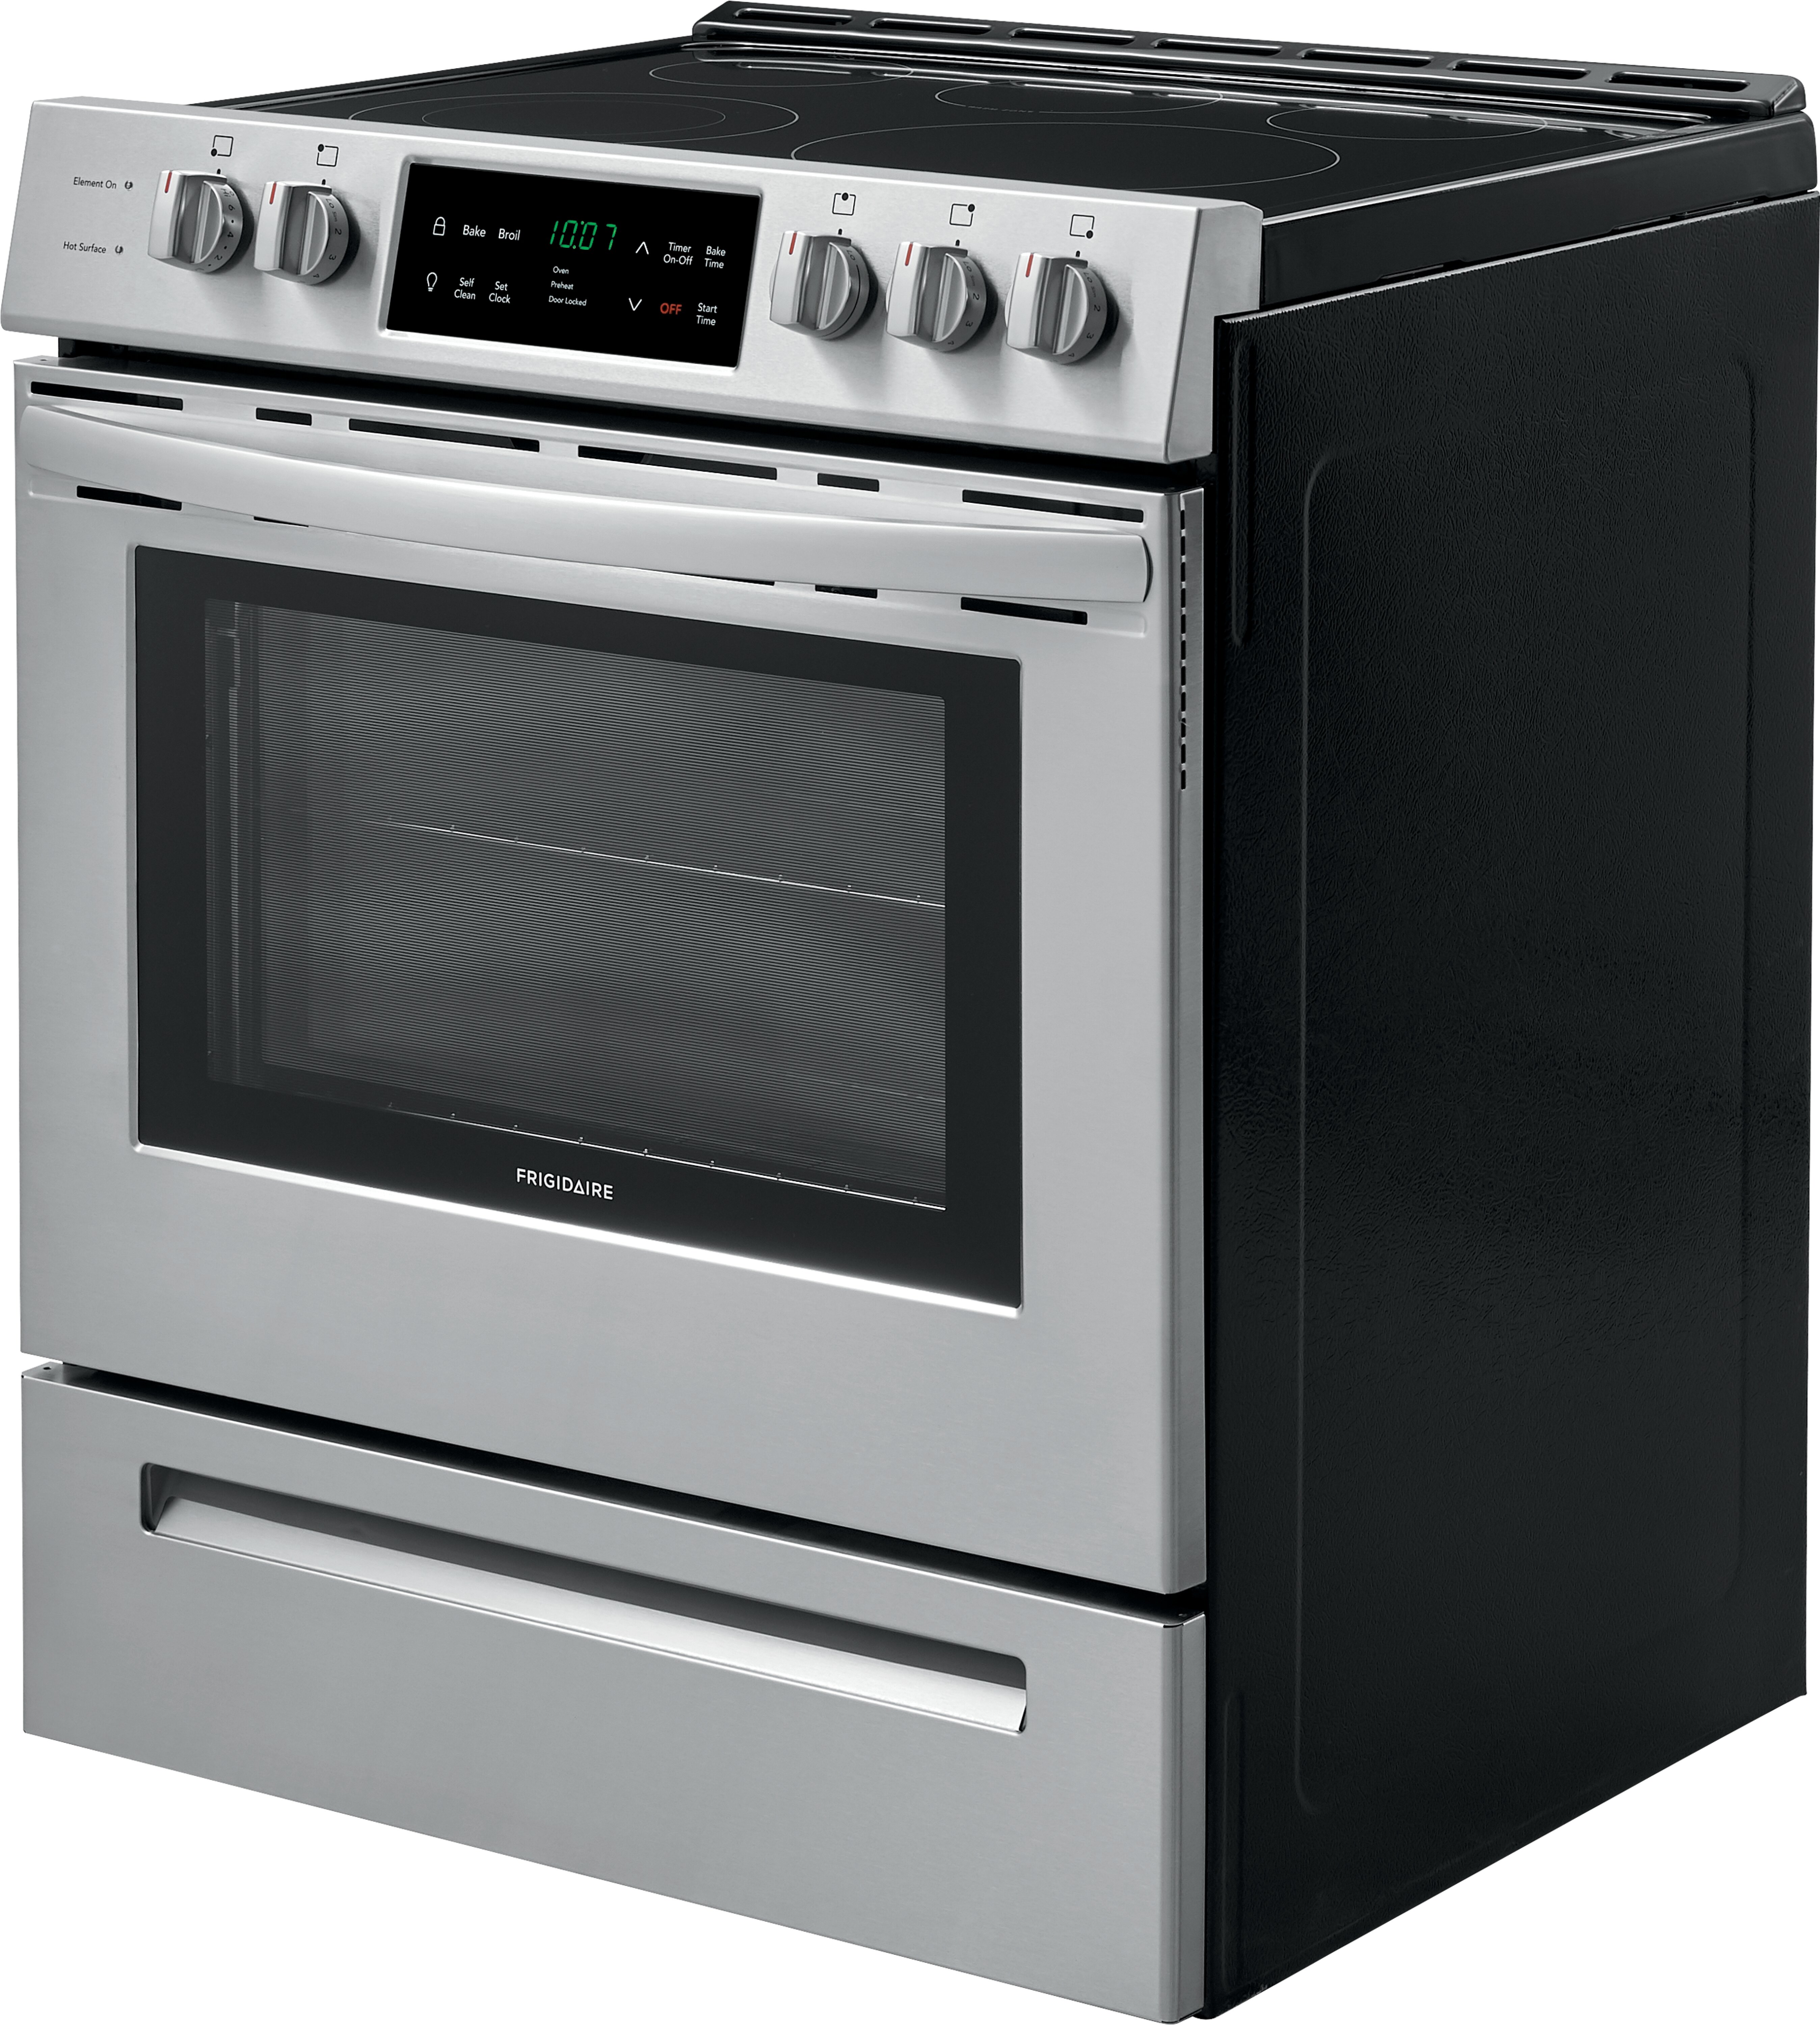 GE 30-in 4 Burners 5-cu ft Freestanding Electric Range (Stainless